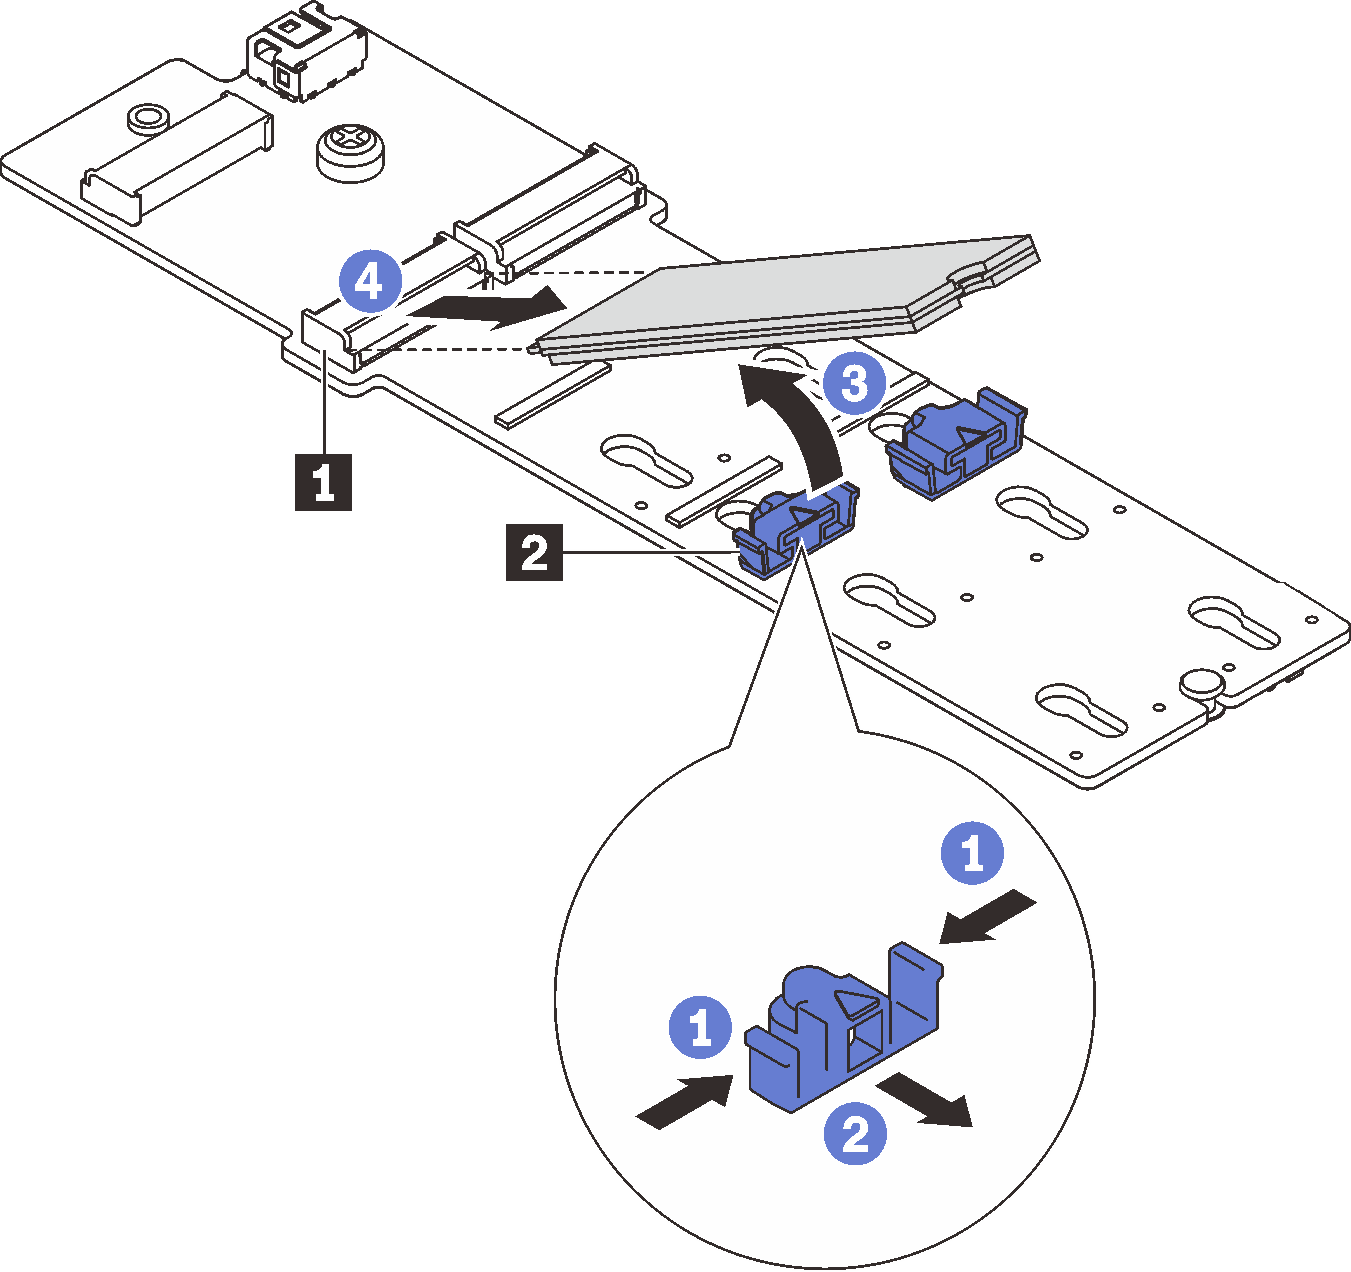 Removing the M.2 drive from the M.2 backplane